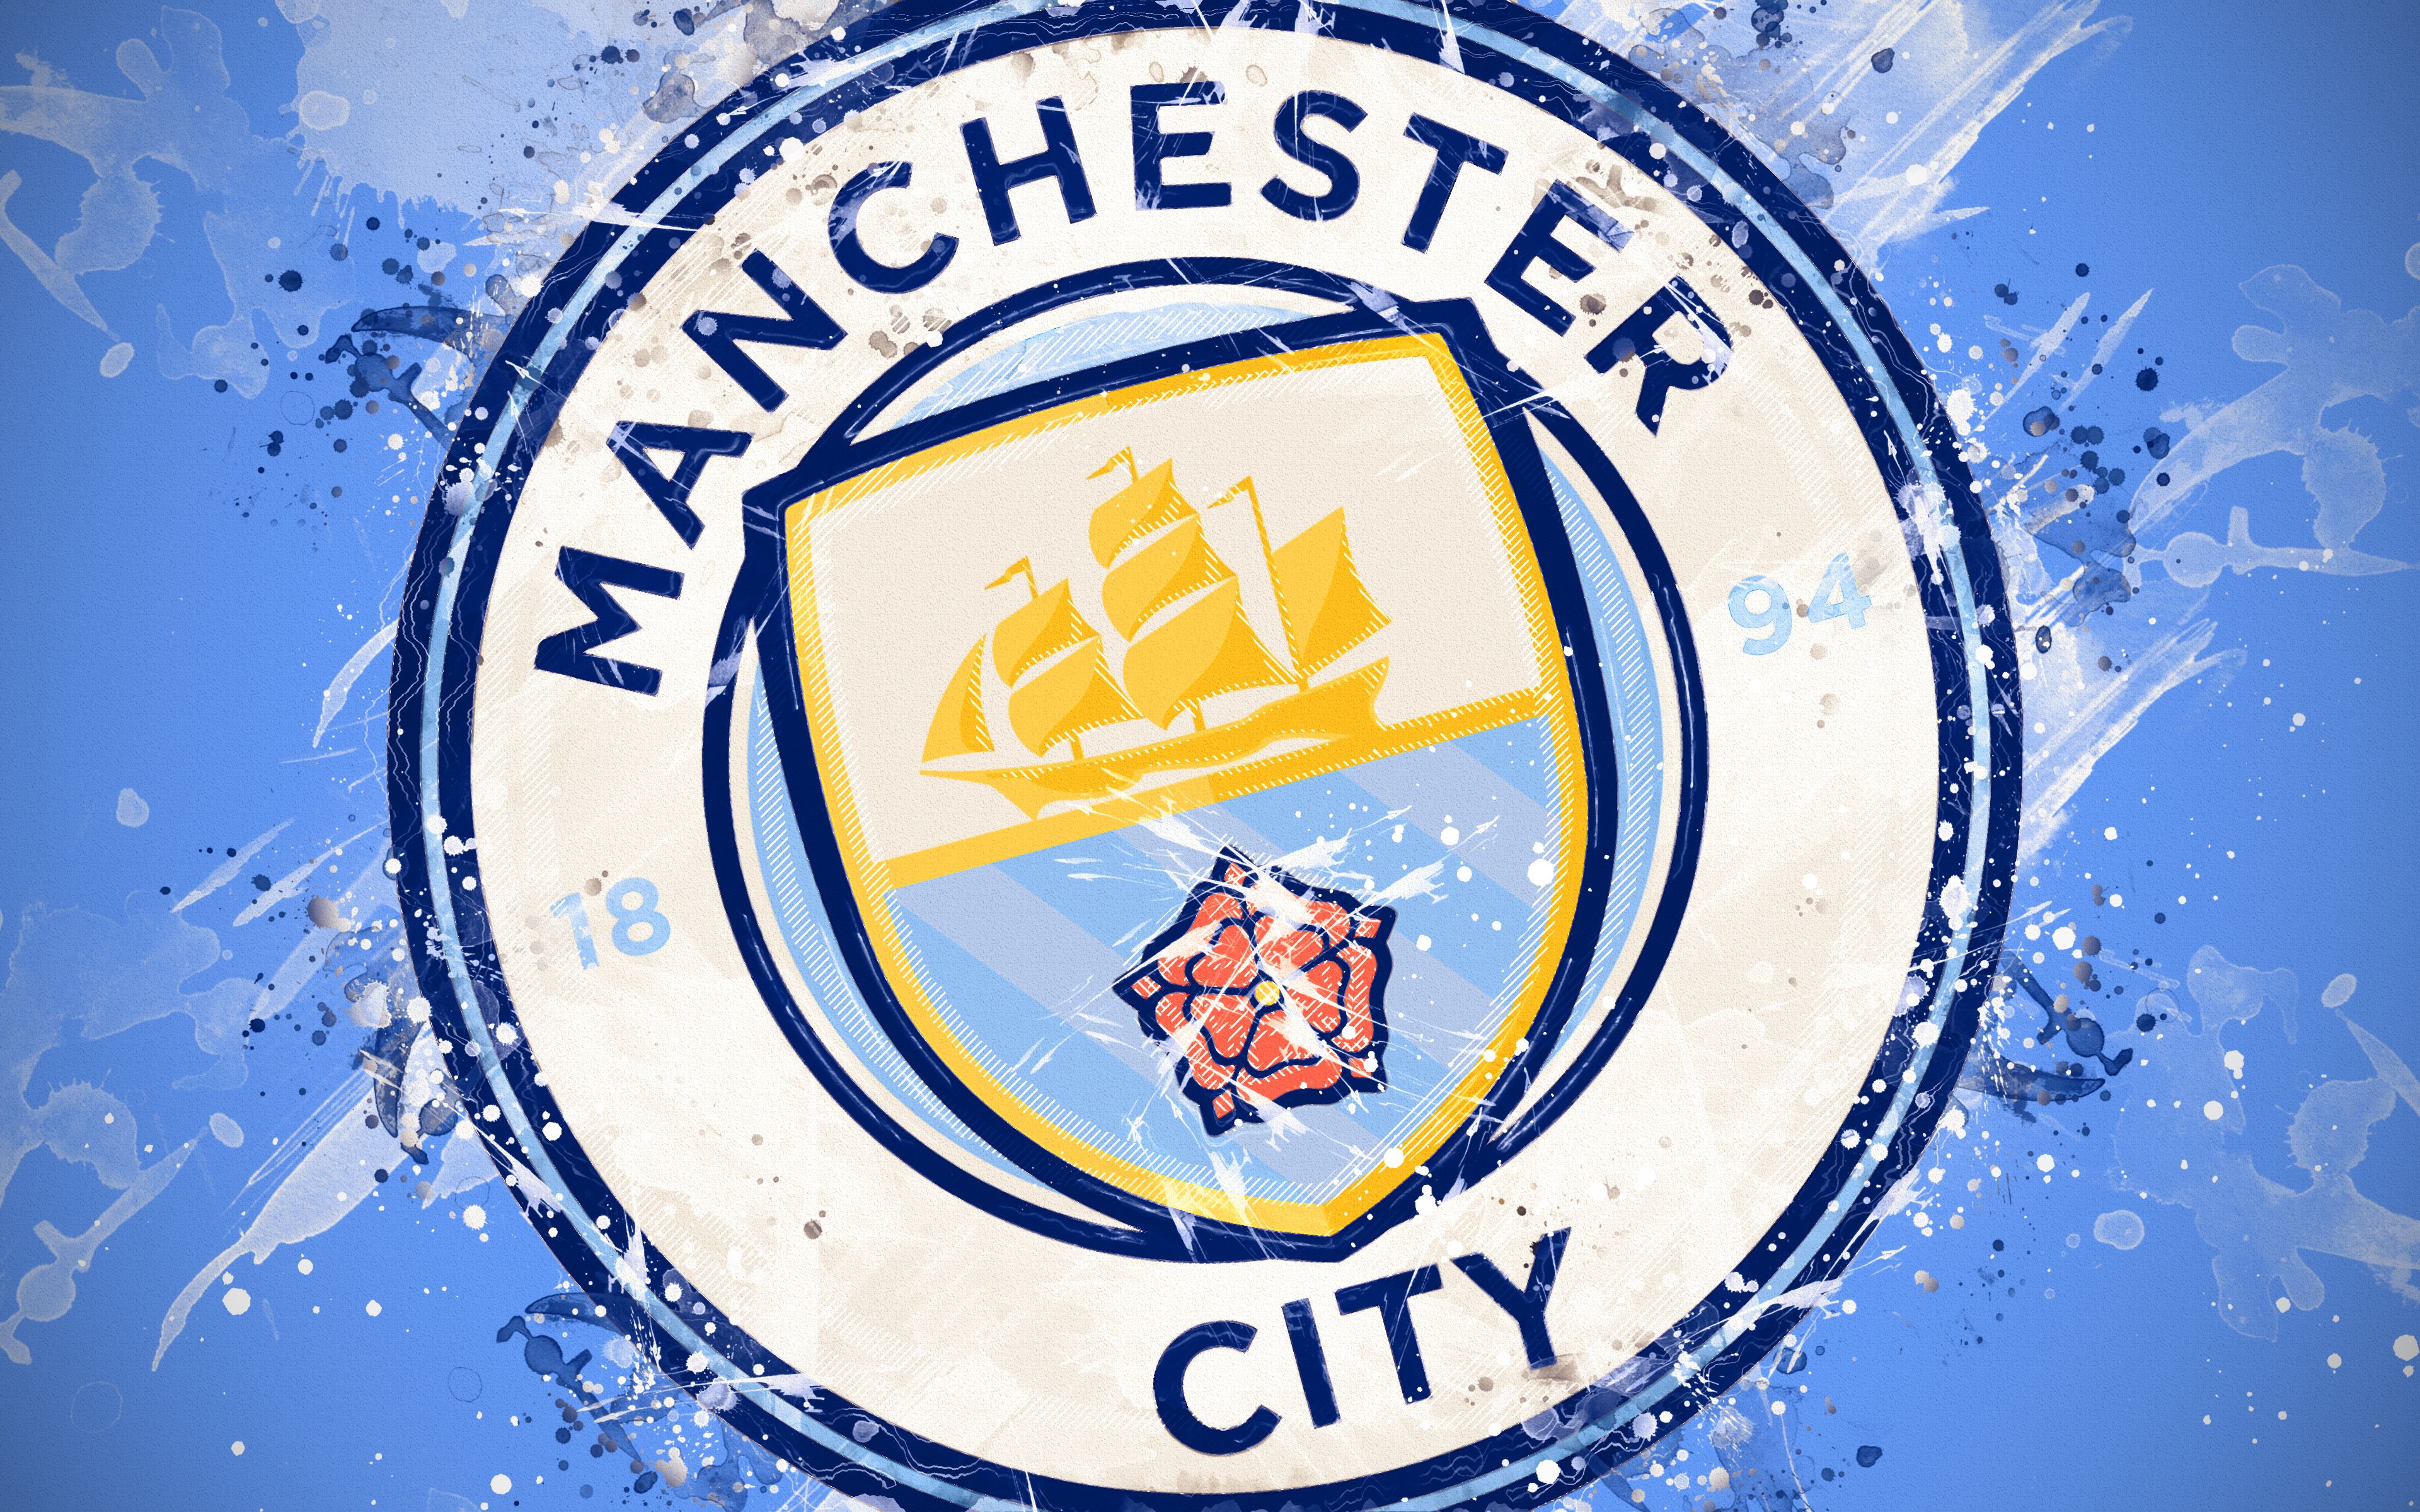 Free download Manchester City Logo 4k Ultra HD Wallpaper Background Image [3840x2400] for your Desktop, Mobile & Tablet. Explore Manchester City Logos Wallpaper. Manchester City Logos Wallpaper, Manchester City